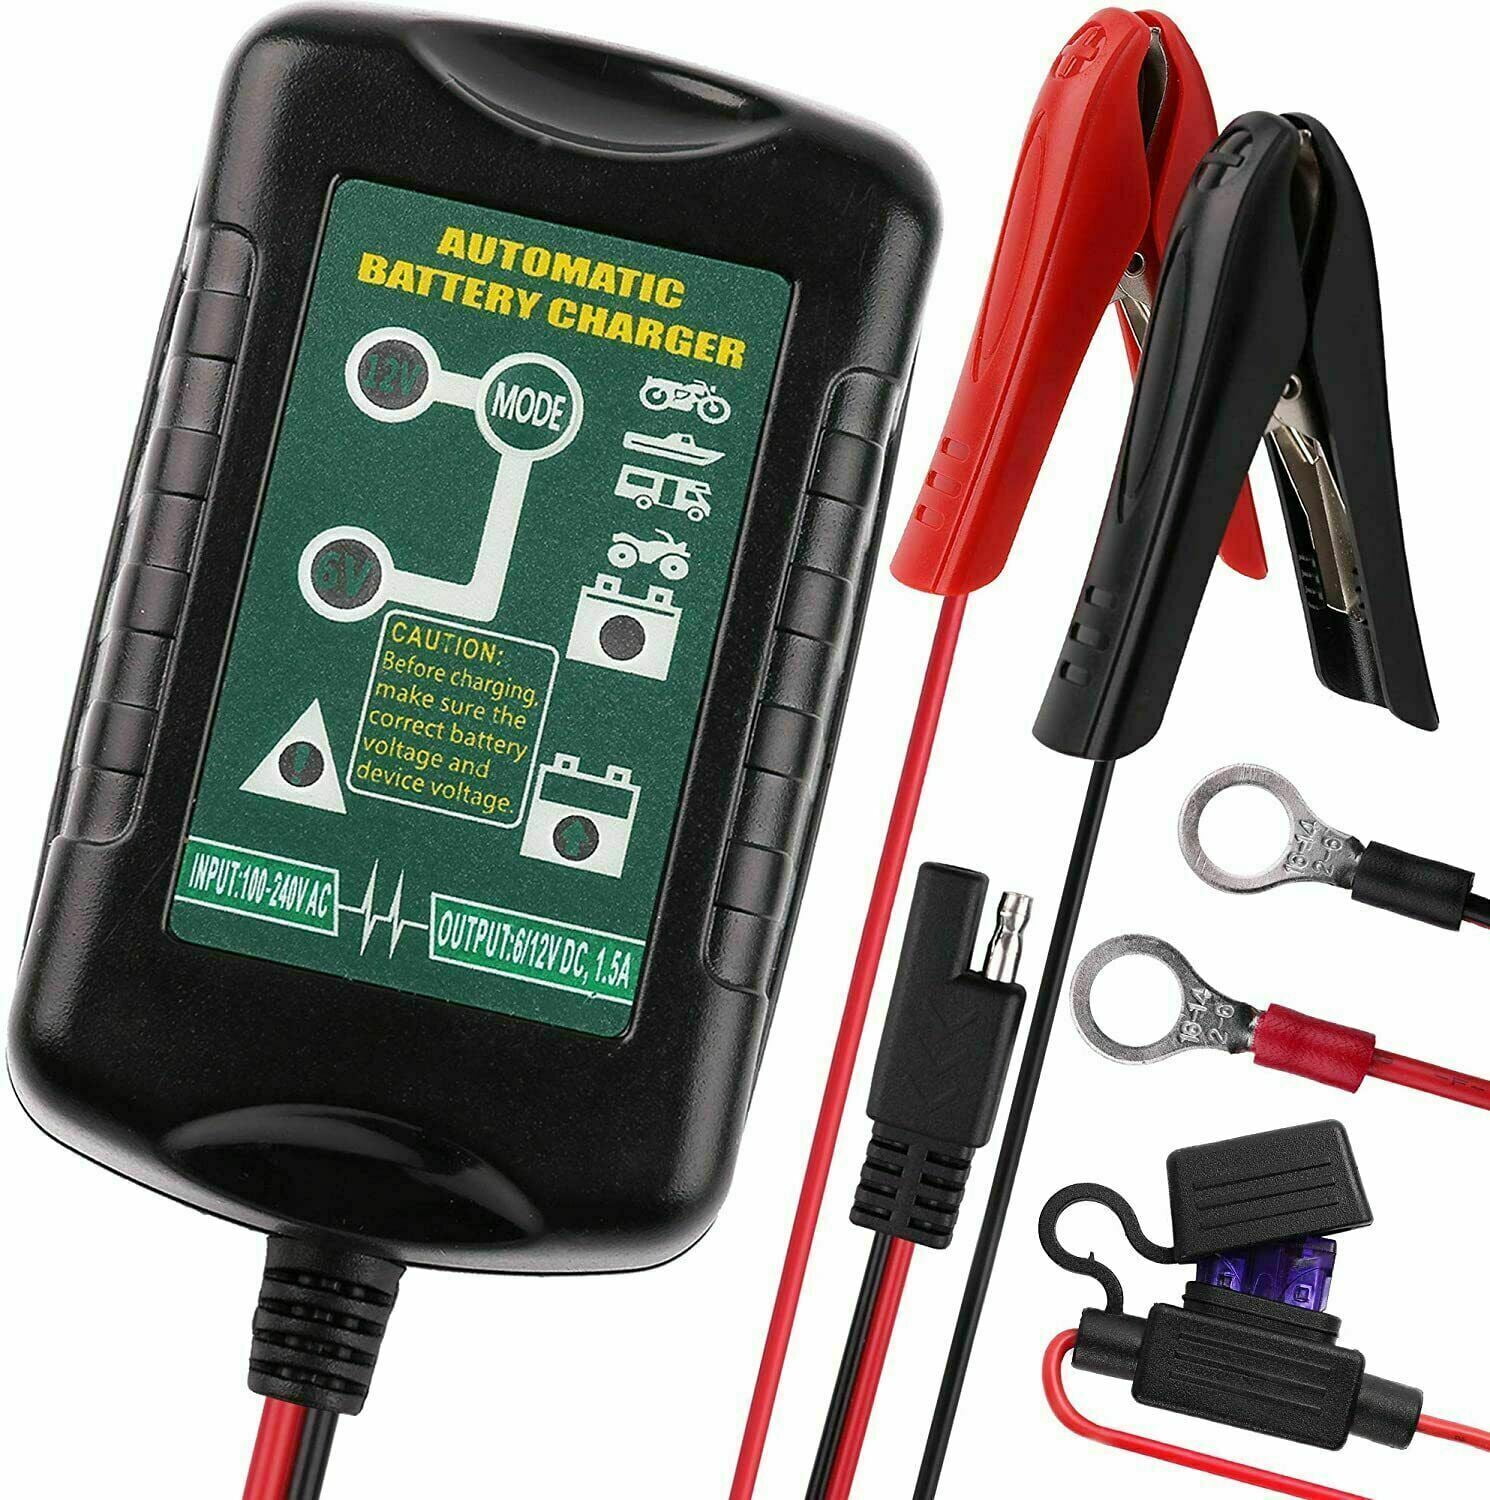 MOTOPOWER MP00205A 12V 800mA Fully Automatic Battery Charger/Maintainer for  Cars, Motorcycles, ATVs, RVs, Powersports, Boat and More. Smart, Compact